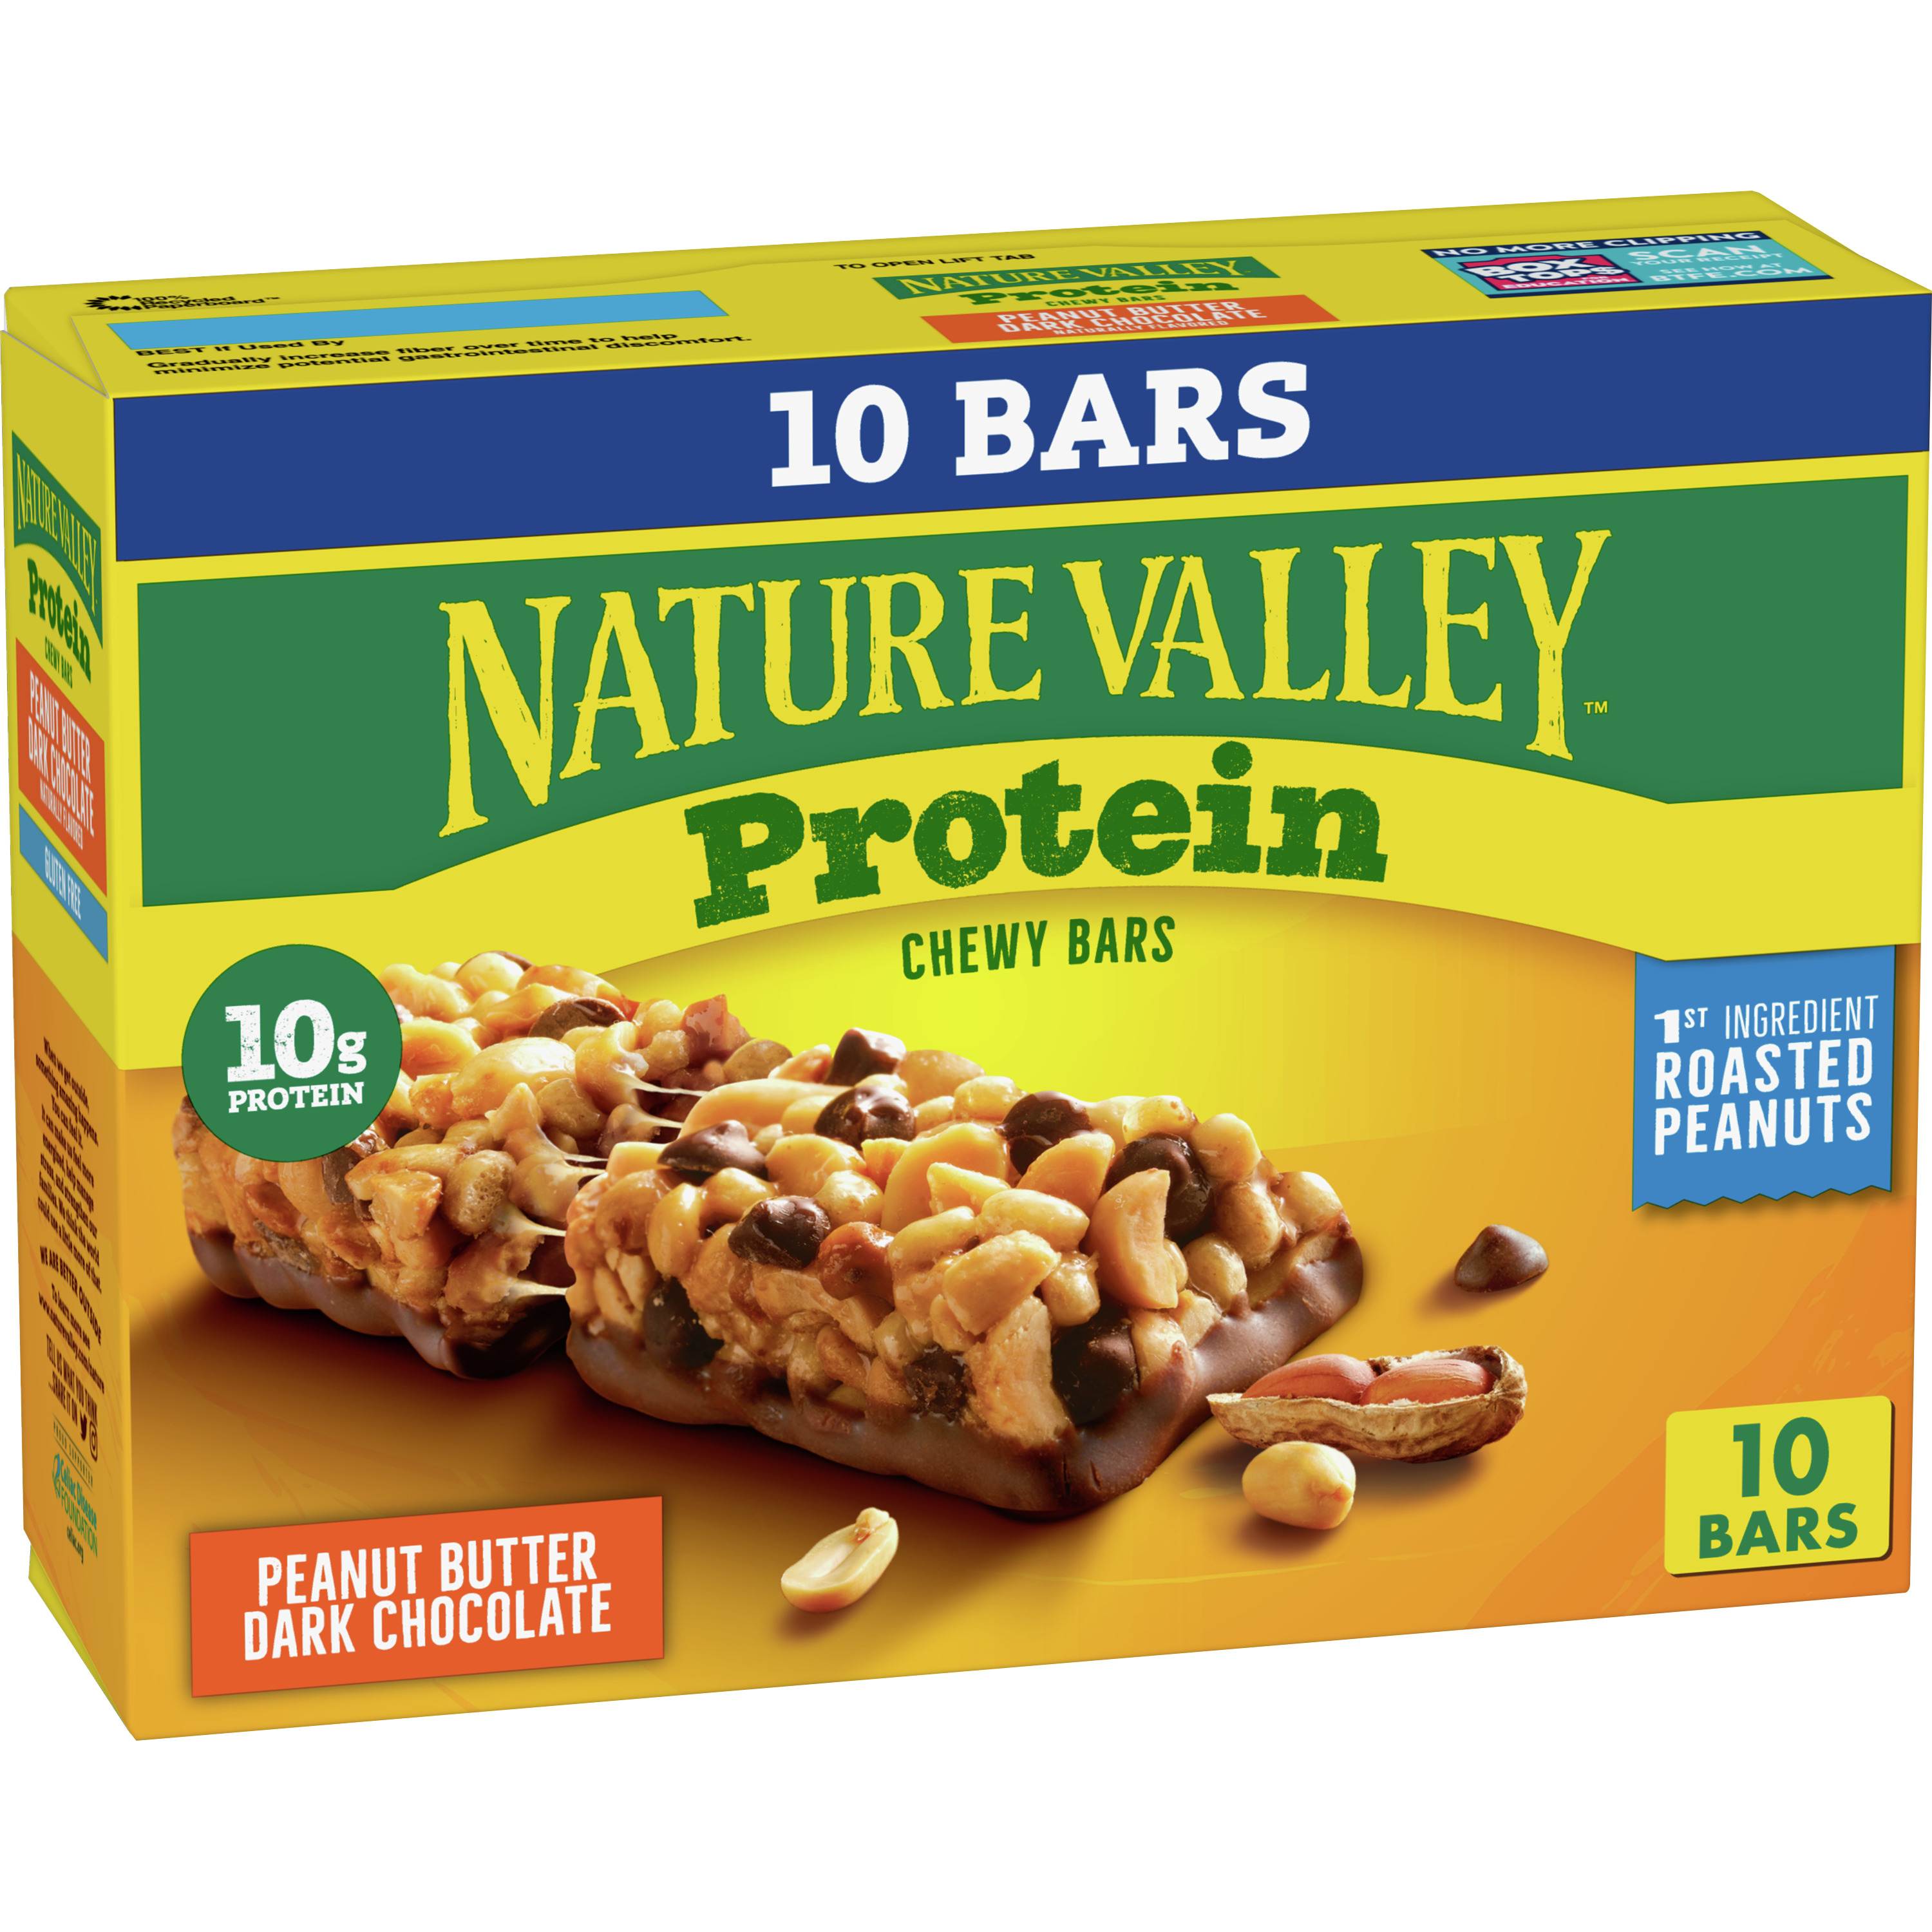 Nature Valley Chewy Protein Granola Bars, Peanut Butter Dark Chocolate, 10 Bars, 14.2 OZ - image 1 of 9